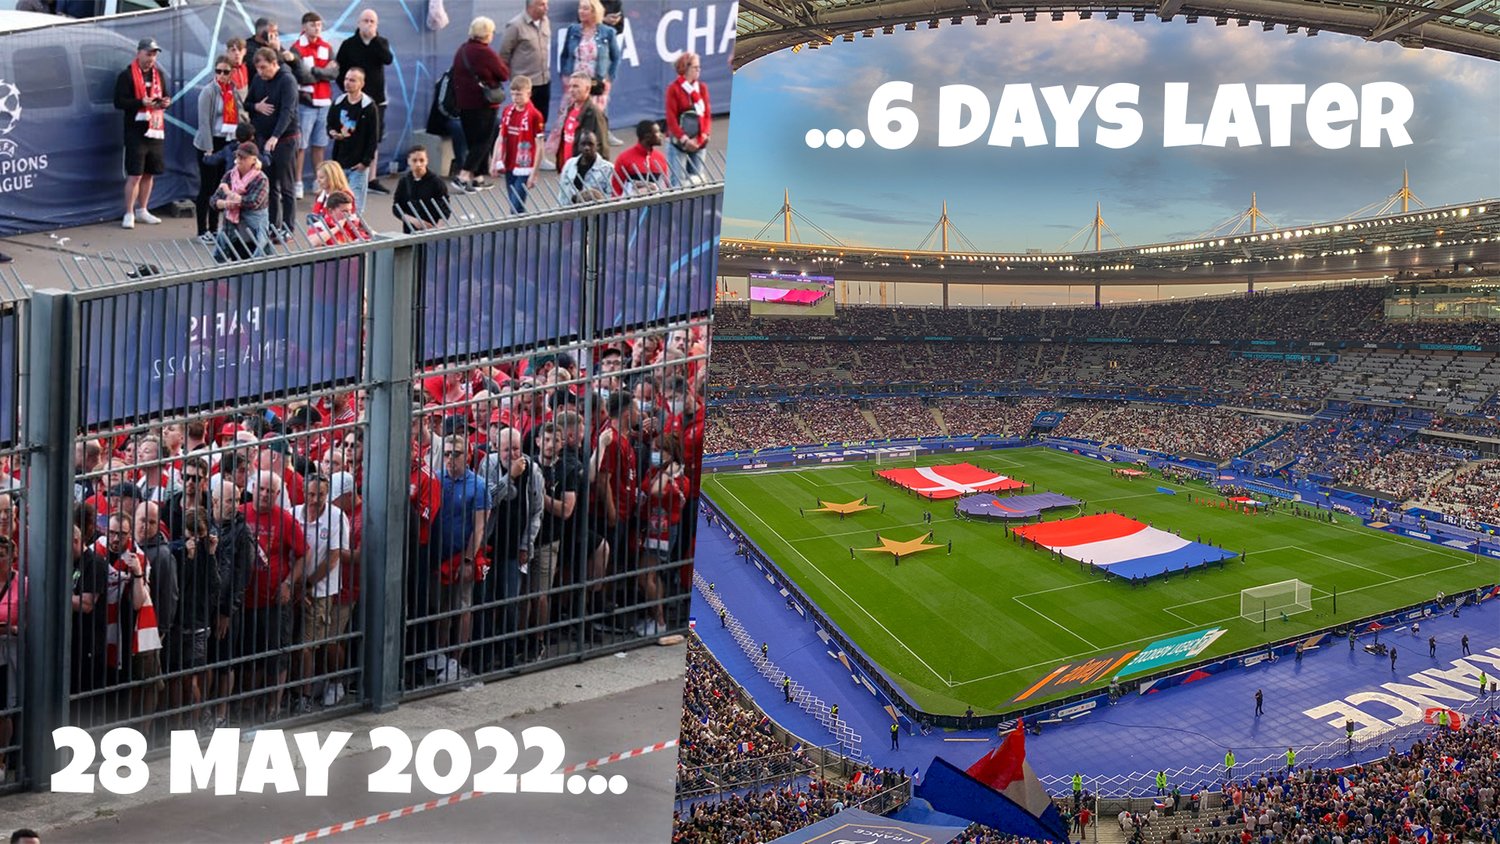 VIDEO: Going to the Stade de France the week after 2022 UEFA Champions League Final — Travelling Tom